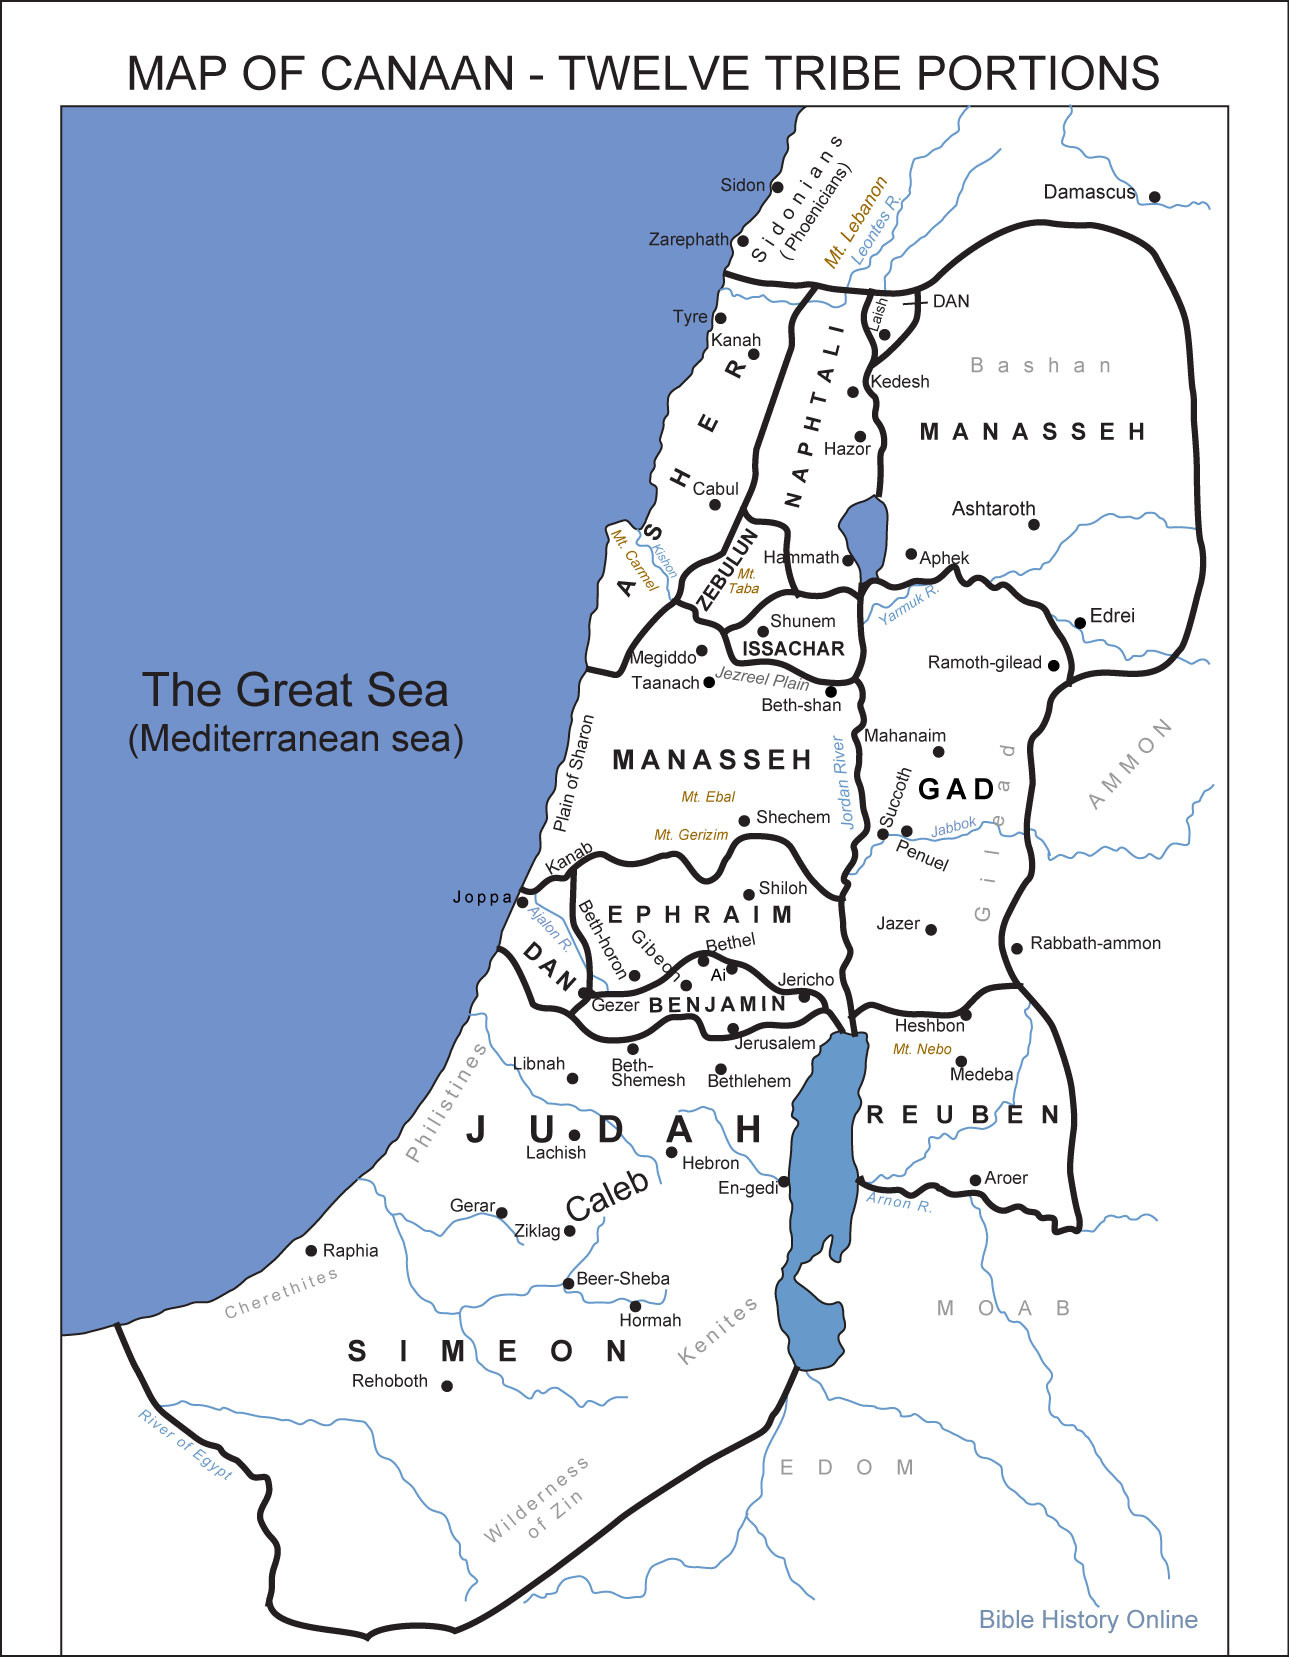 Division of the Promised Land to the 12 Tribes of Israel Map